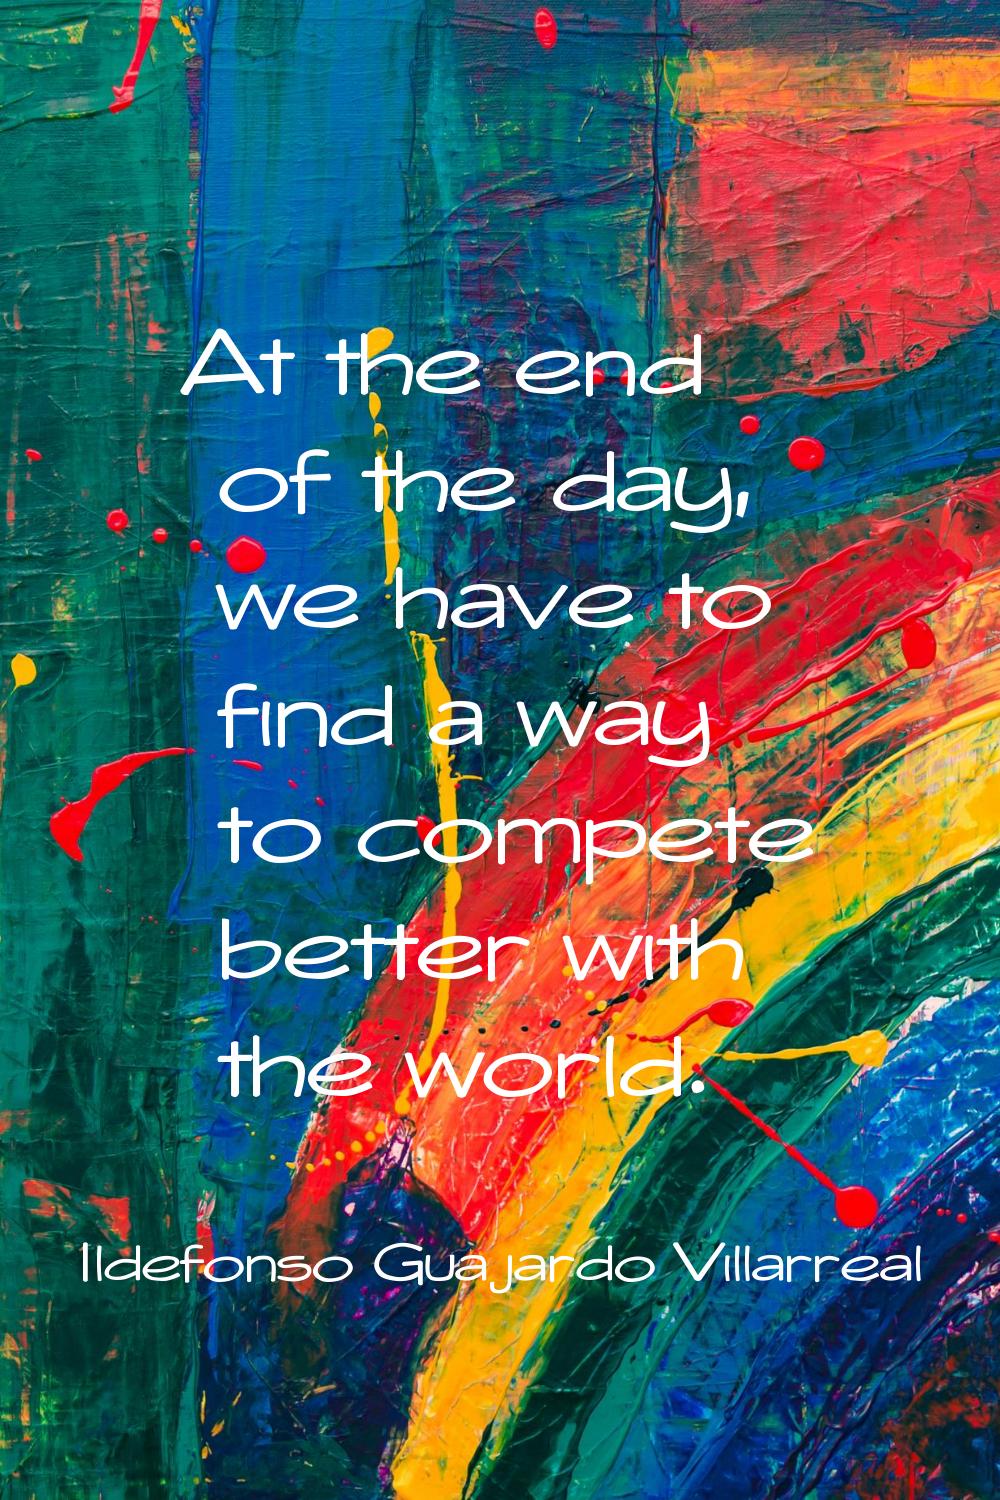 At the end of the day, we have to find a way to compete better with the world.